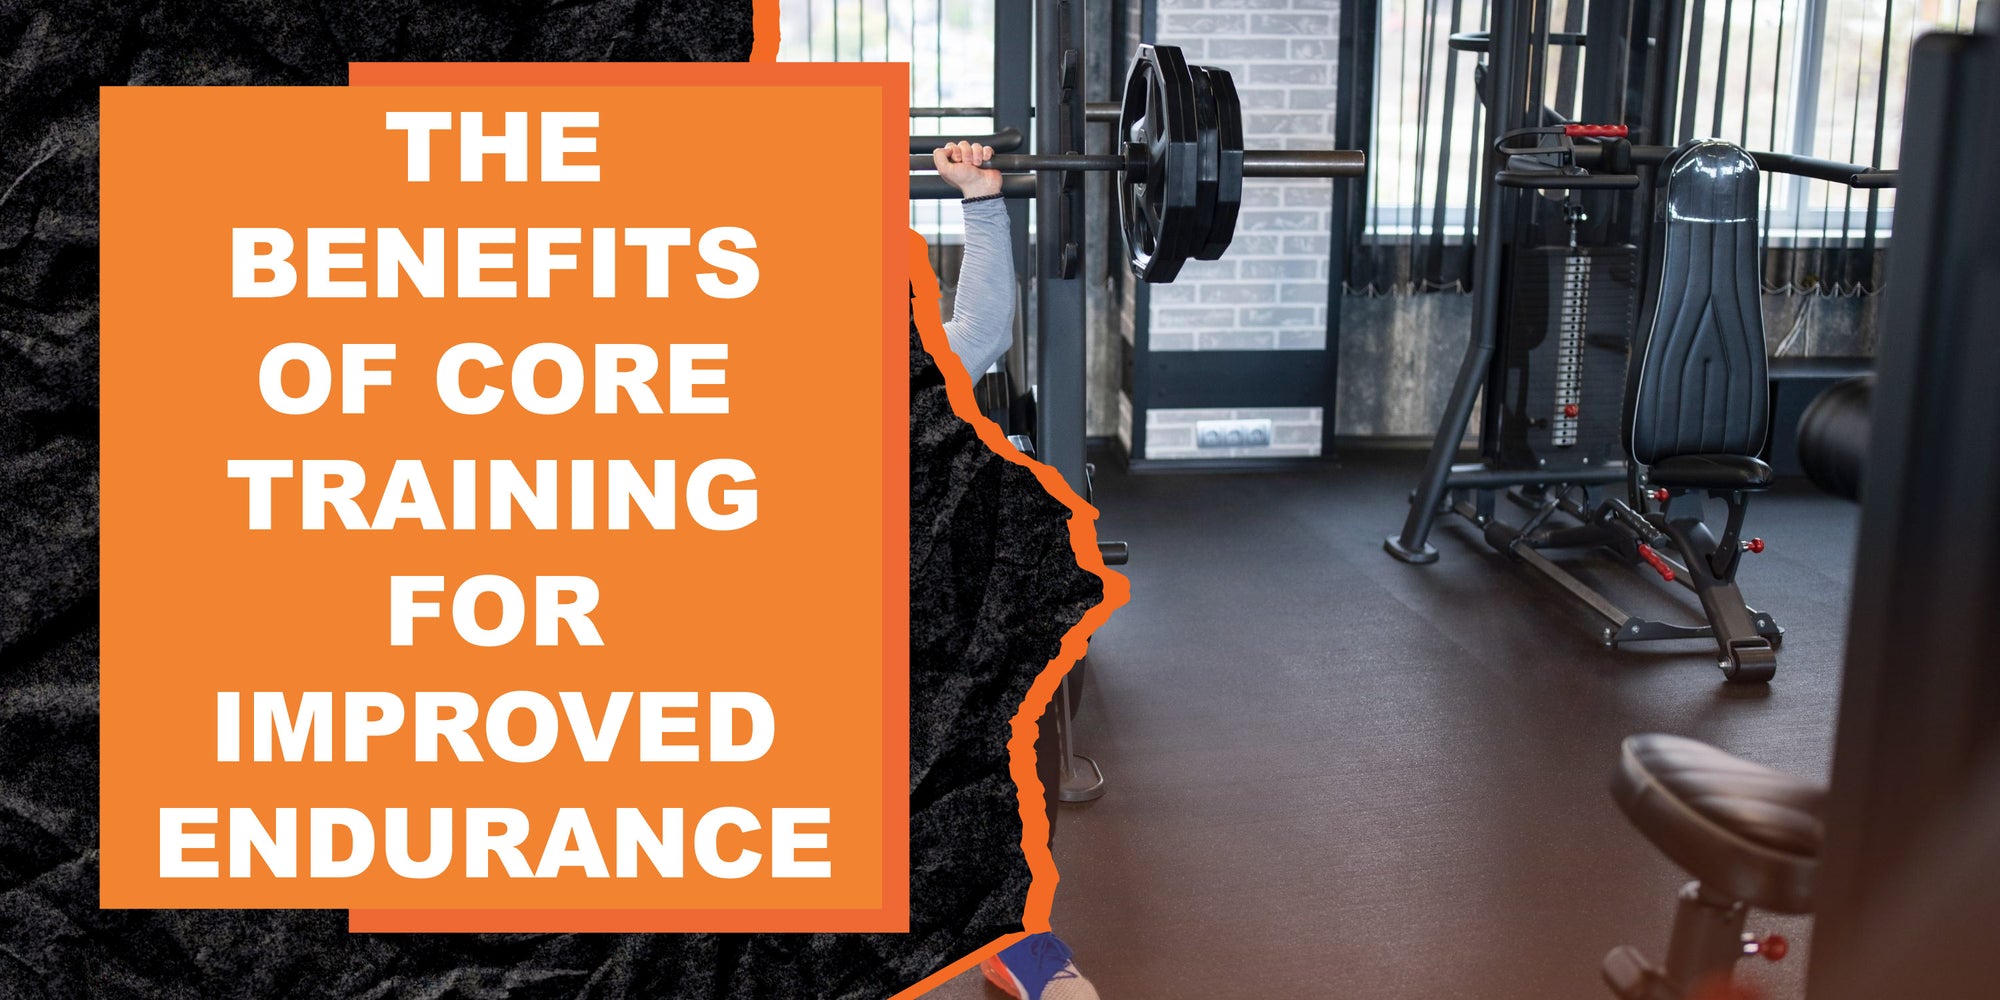 The Benefits of Core Training for Improved Endurance